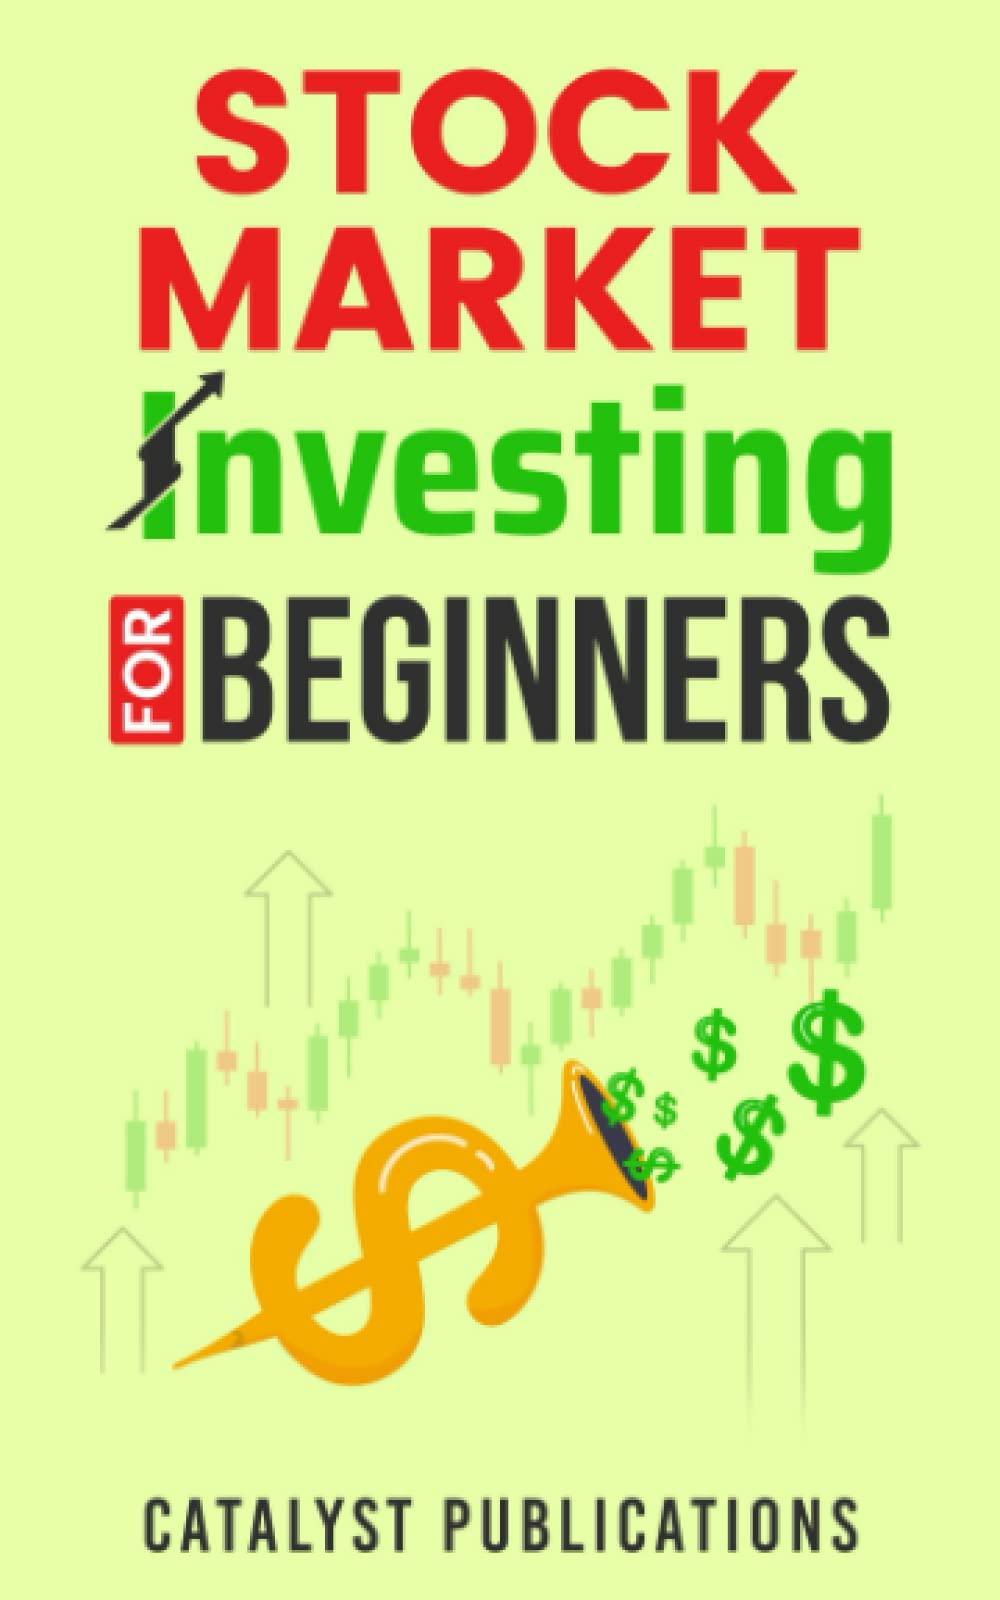 stock market investing for beginners 1st edition catalyst publications b0br9c87k6, 979-8371565679